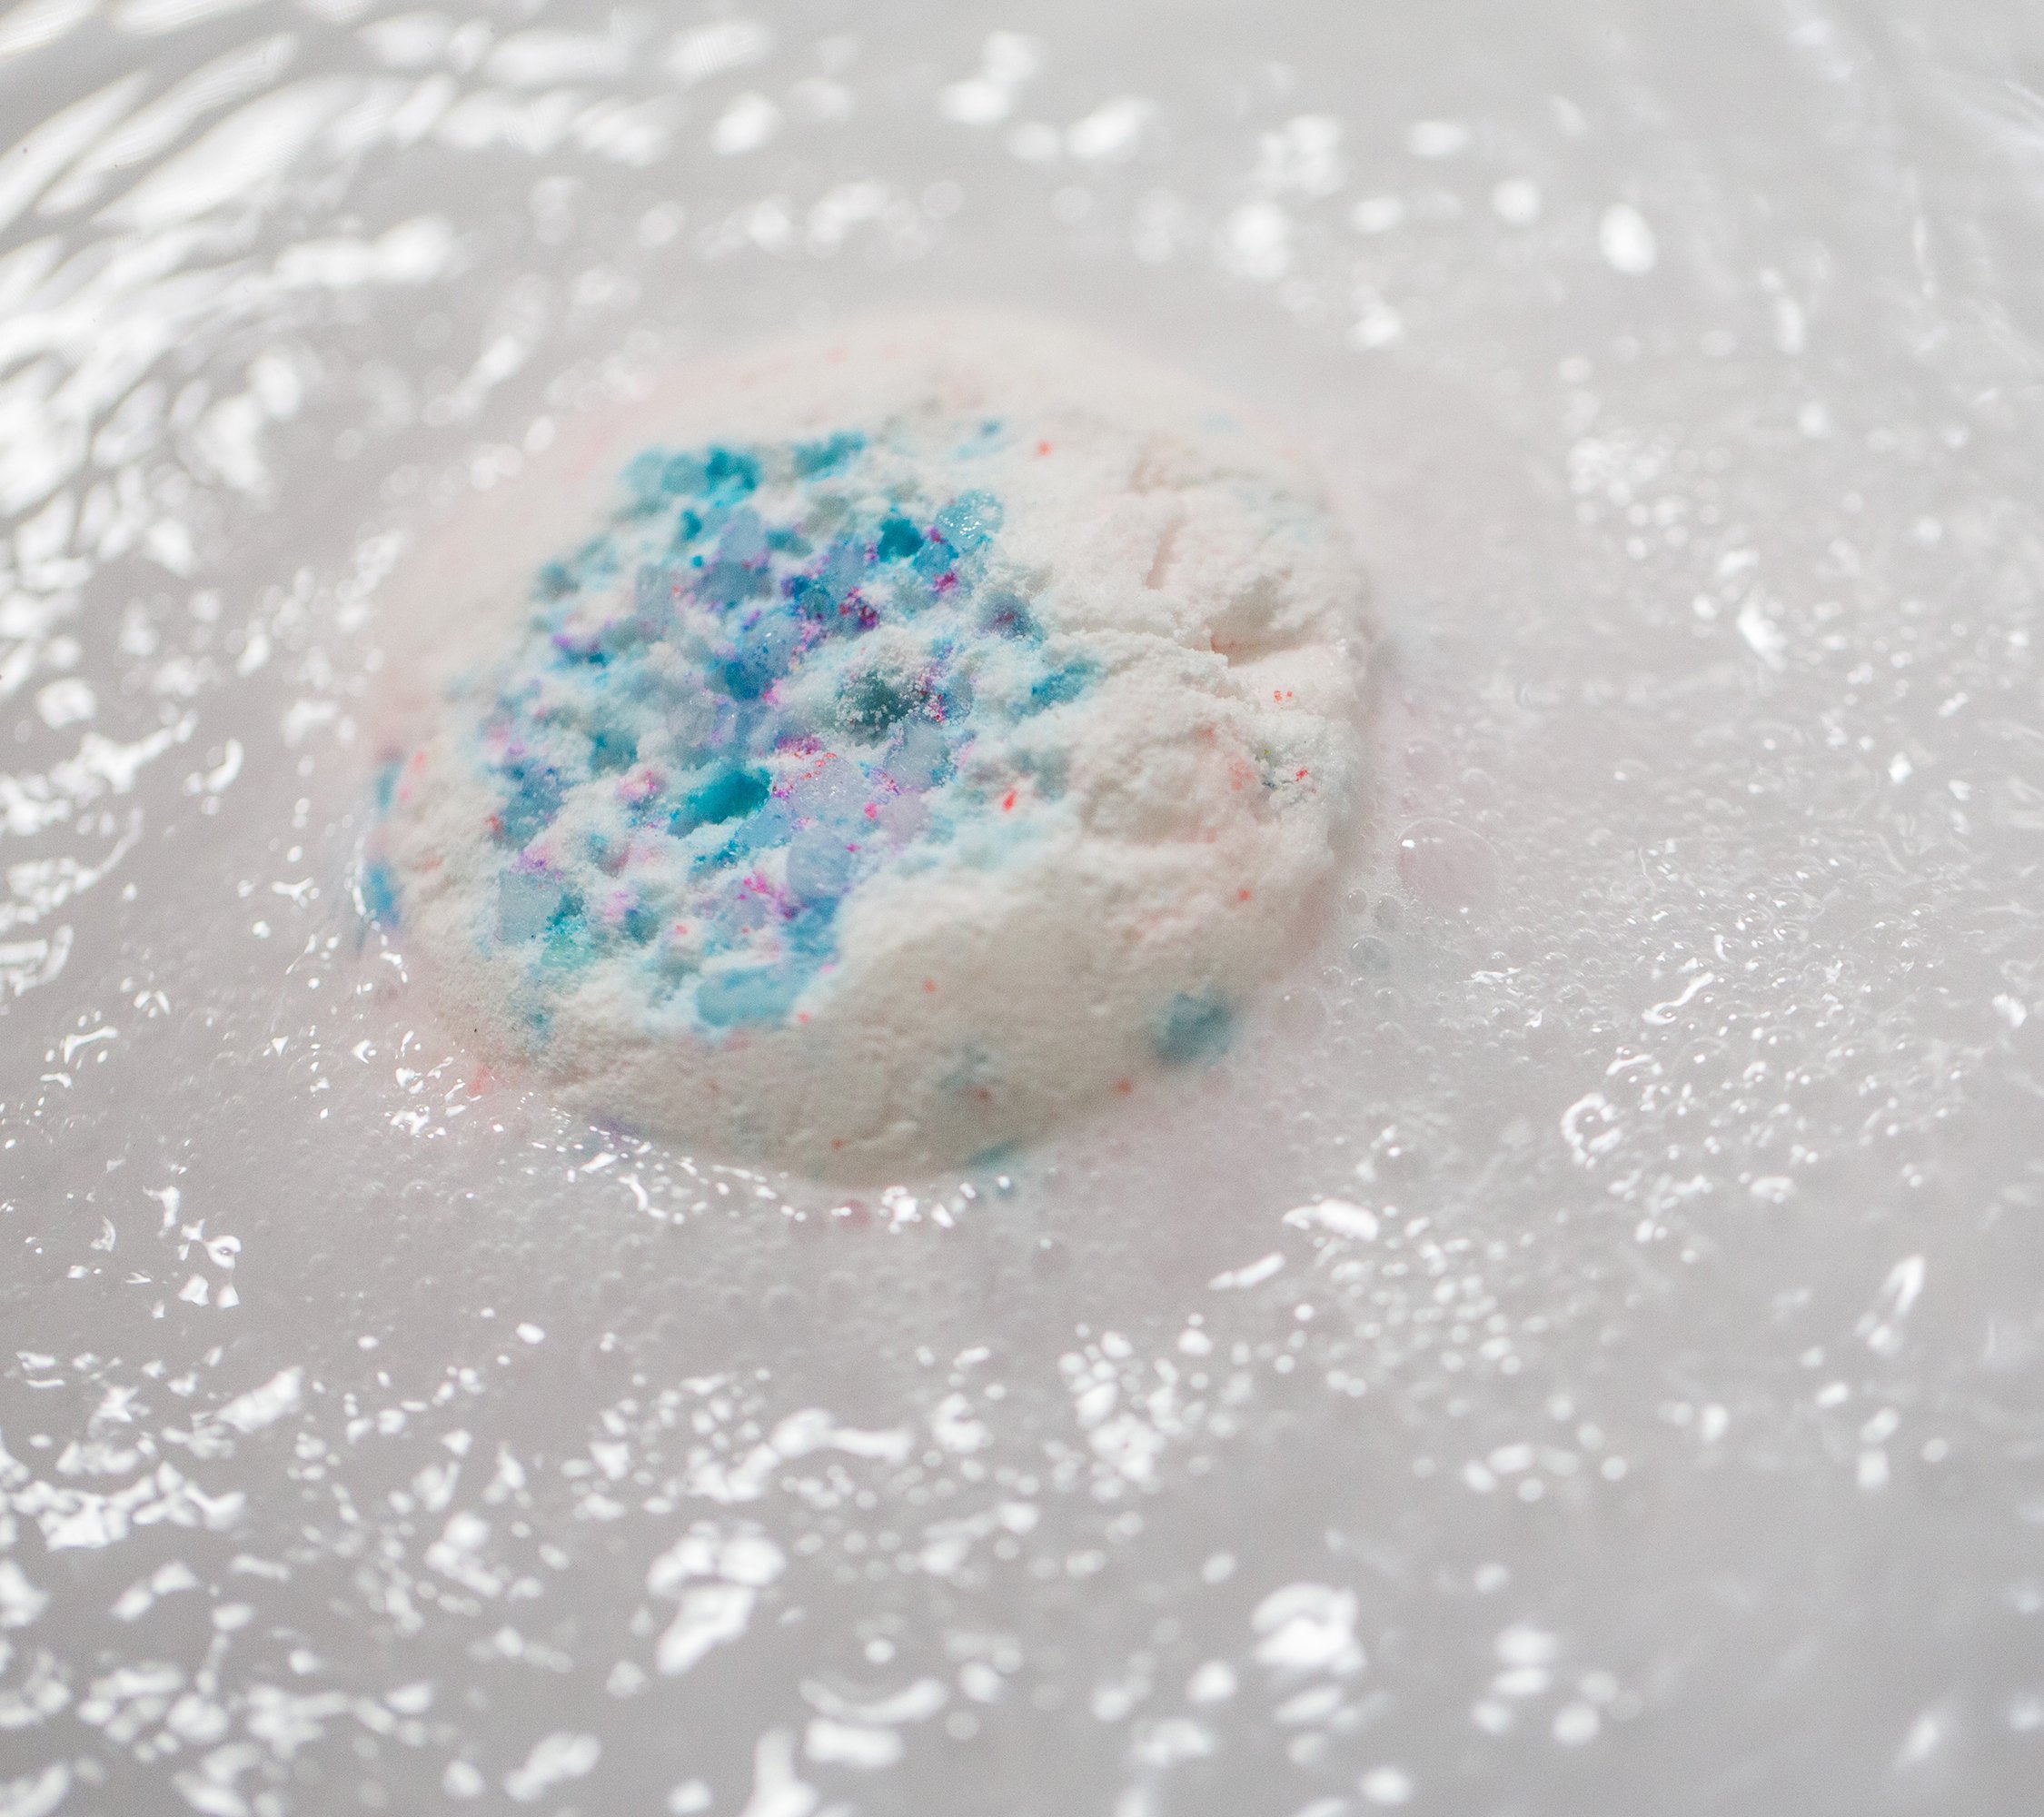 A close-up of a semi-submerged Sakura bath bomb, pink-flecked white with blue coloured salt, fizzing in milky white waters.